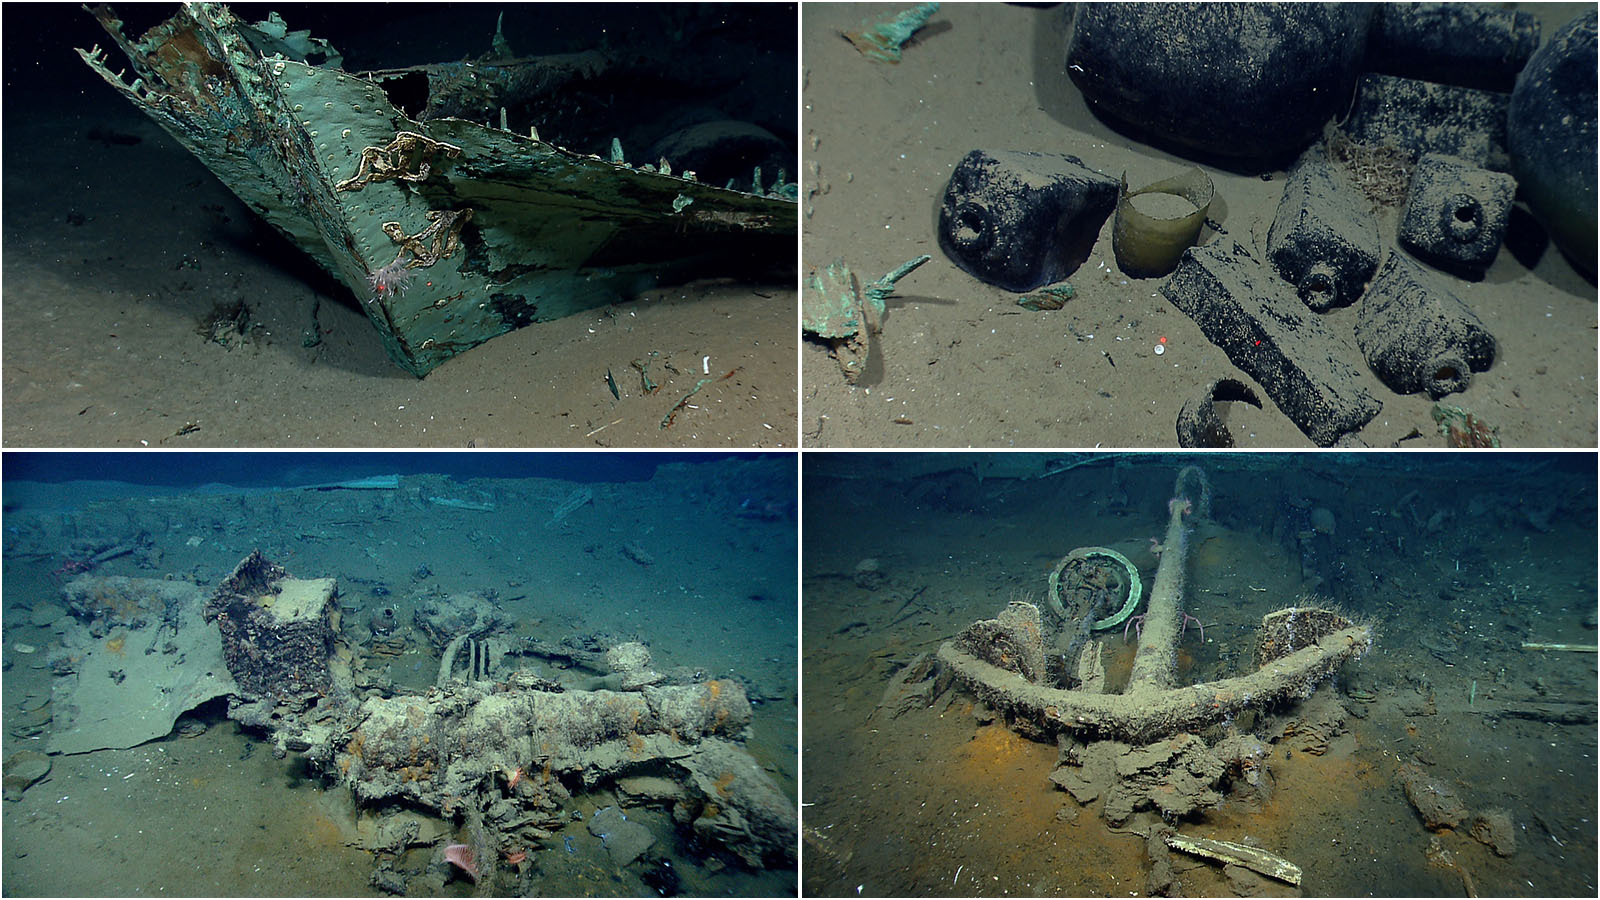 Monterrey A rests beneath 1,330 meters (4,364 feet) of water in the Gulf of Mexico along with its cargo and other artifacts like a stove, cannon, and anchor as seen here. Images courtesy of NOAA Ocean Exploration, Gulf of Mexico 2012 and Exploration of the Gulf of Mexico 2014.